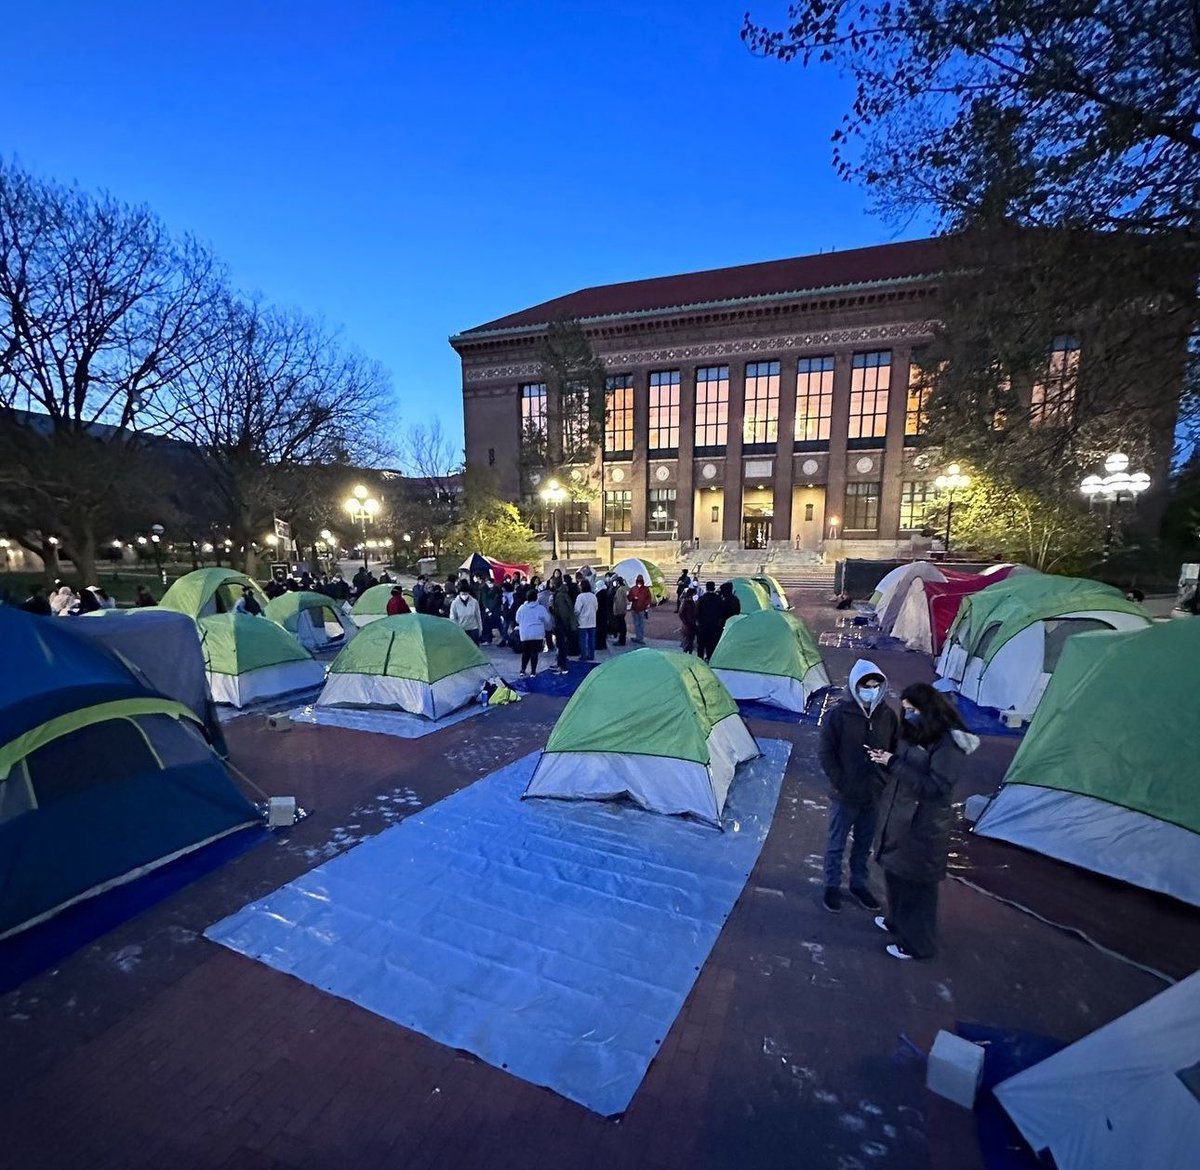 Completely organic protest, with matching tents.